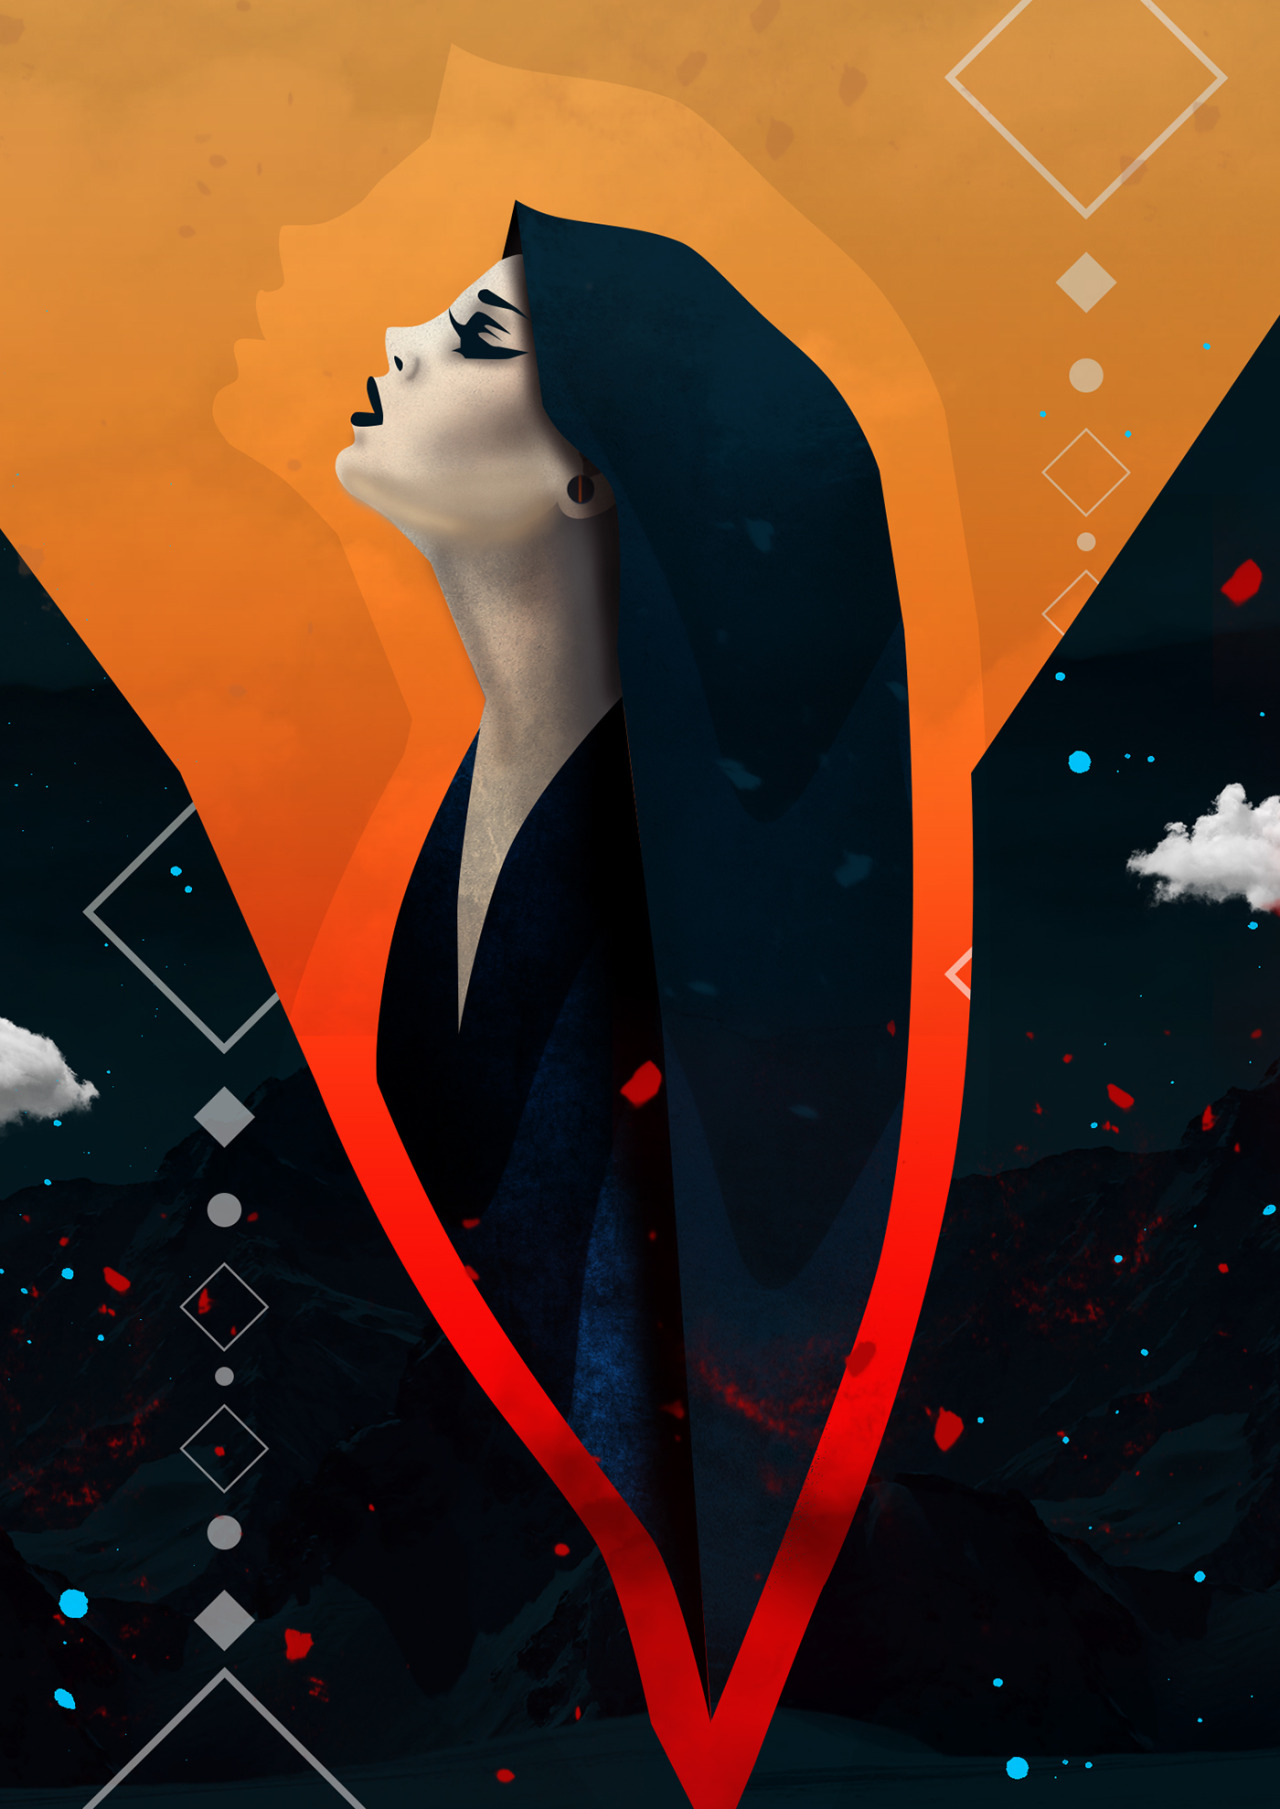 Digital art selected for the Daily Inspiration #2433